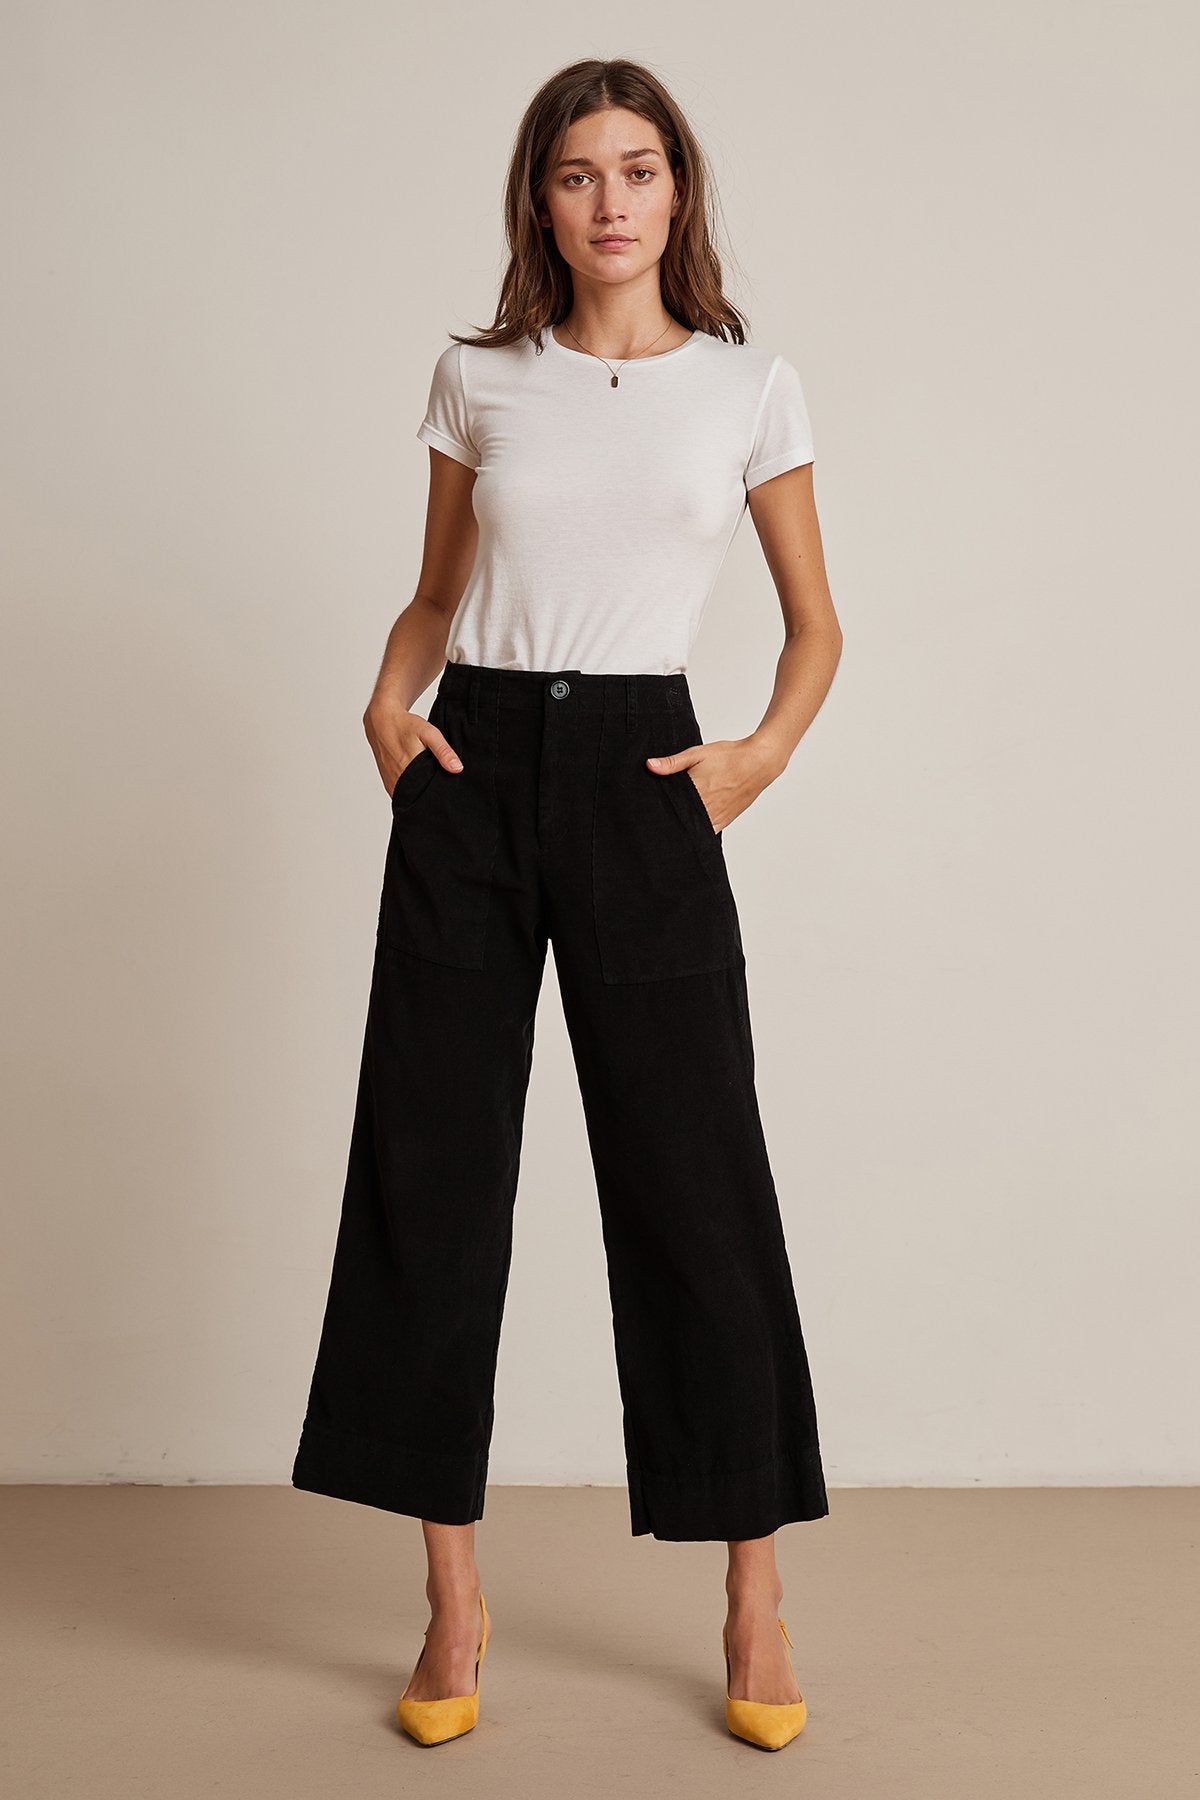 CORDUROY WIDE LEG PANT - Sgt. Peppers by Dear Prudence